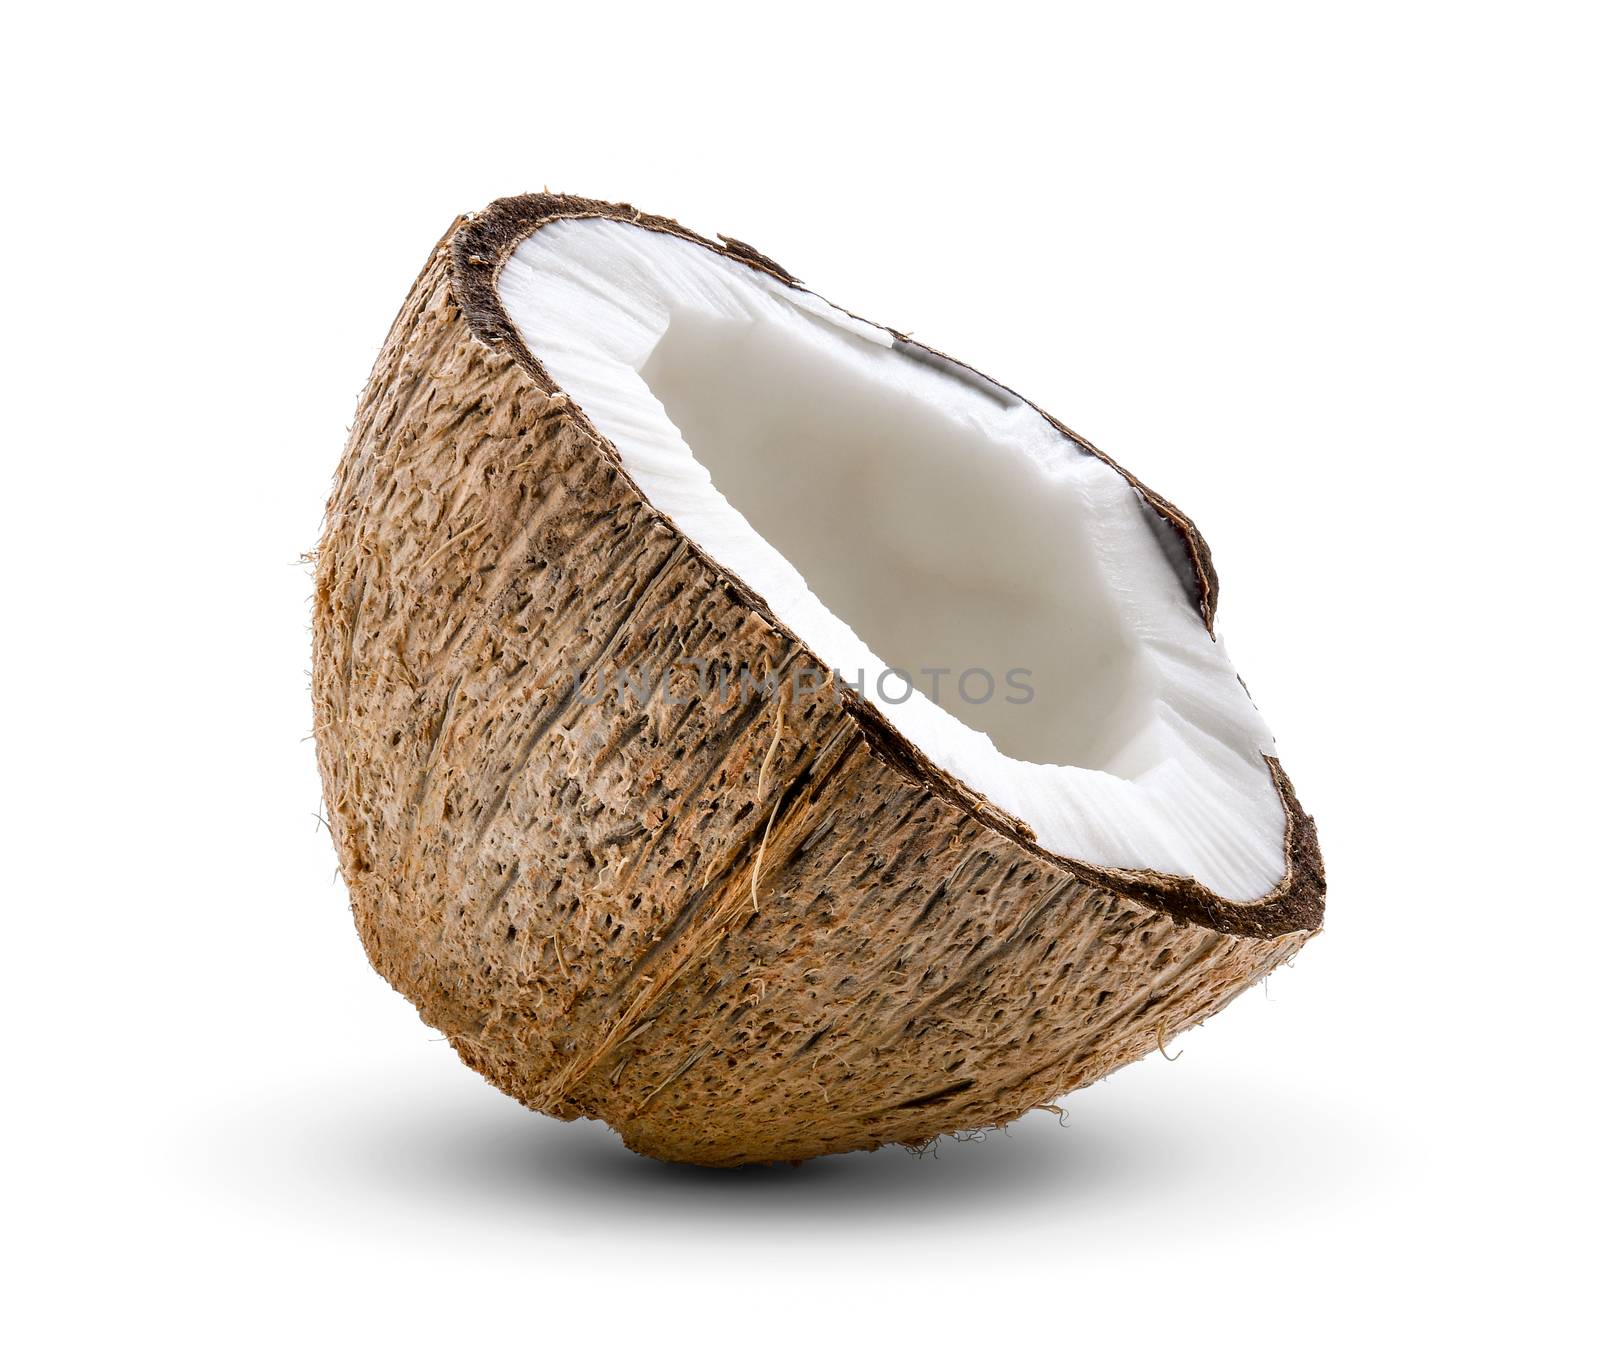 Half Coconut isolated on white background by sommai